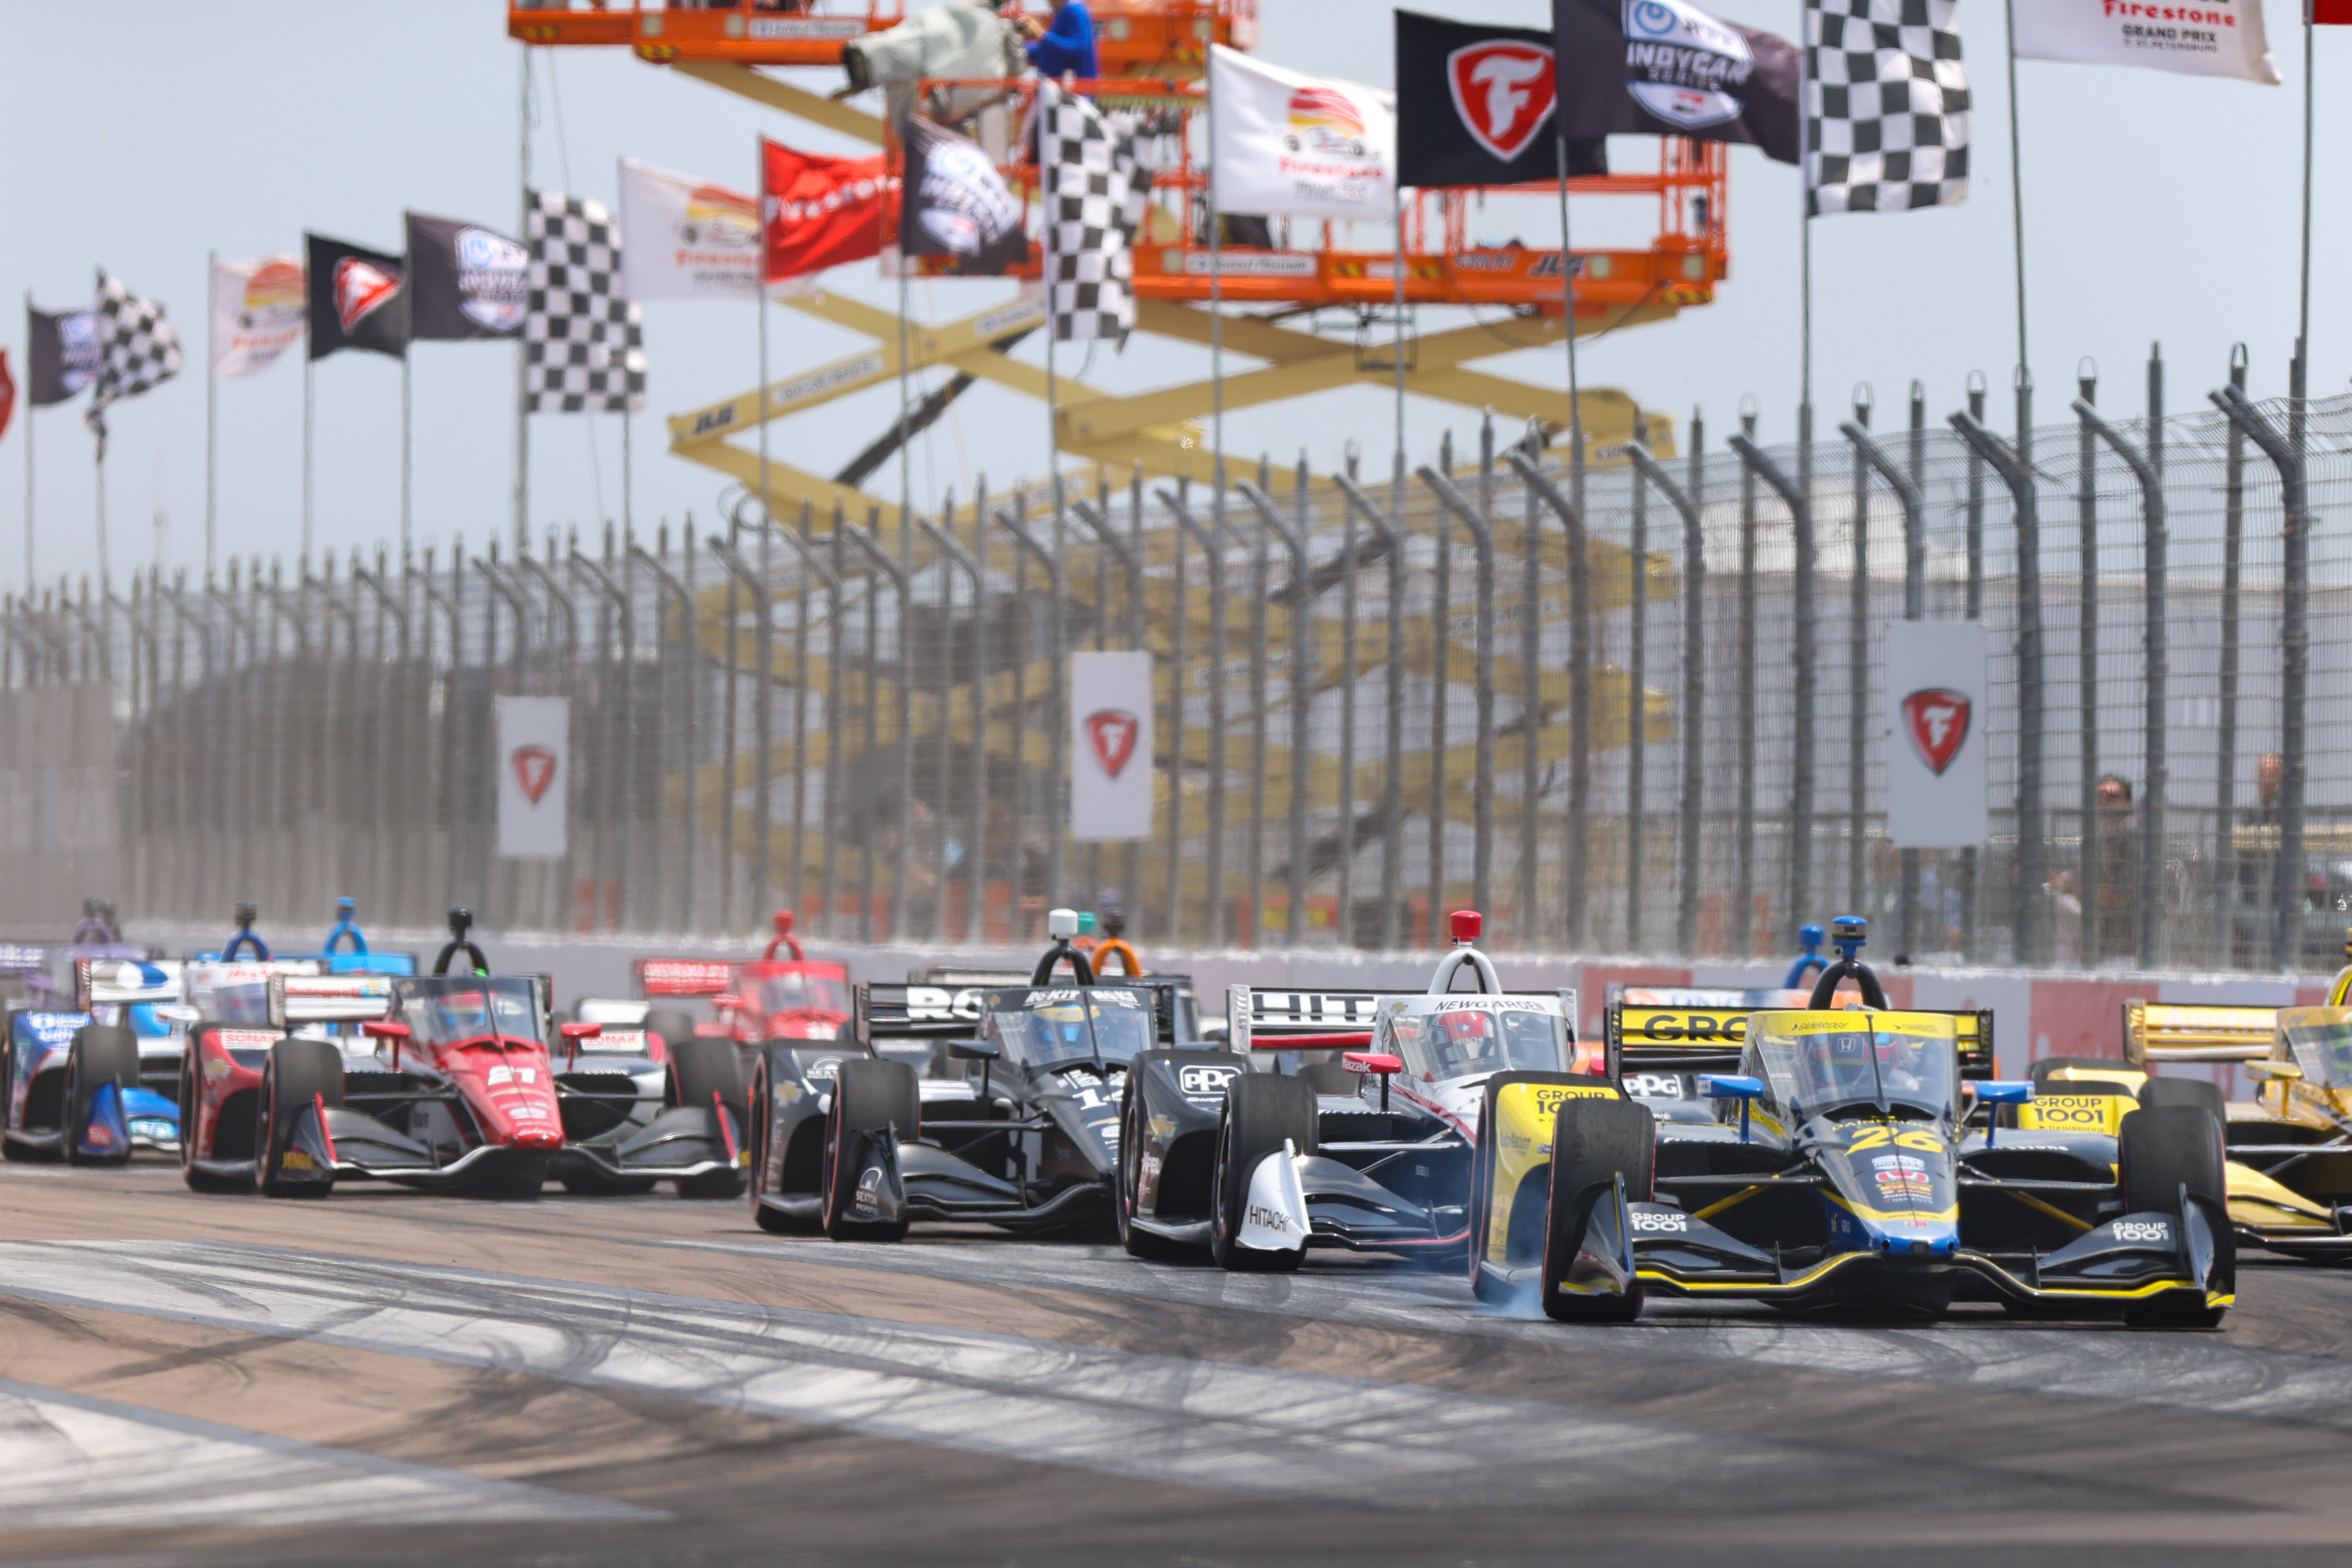 Indy Race Schedule 2022 Indycar Series Will Open 2022 Season In February For First Time Since 2004